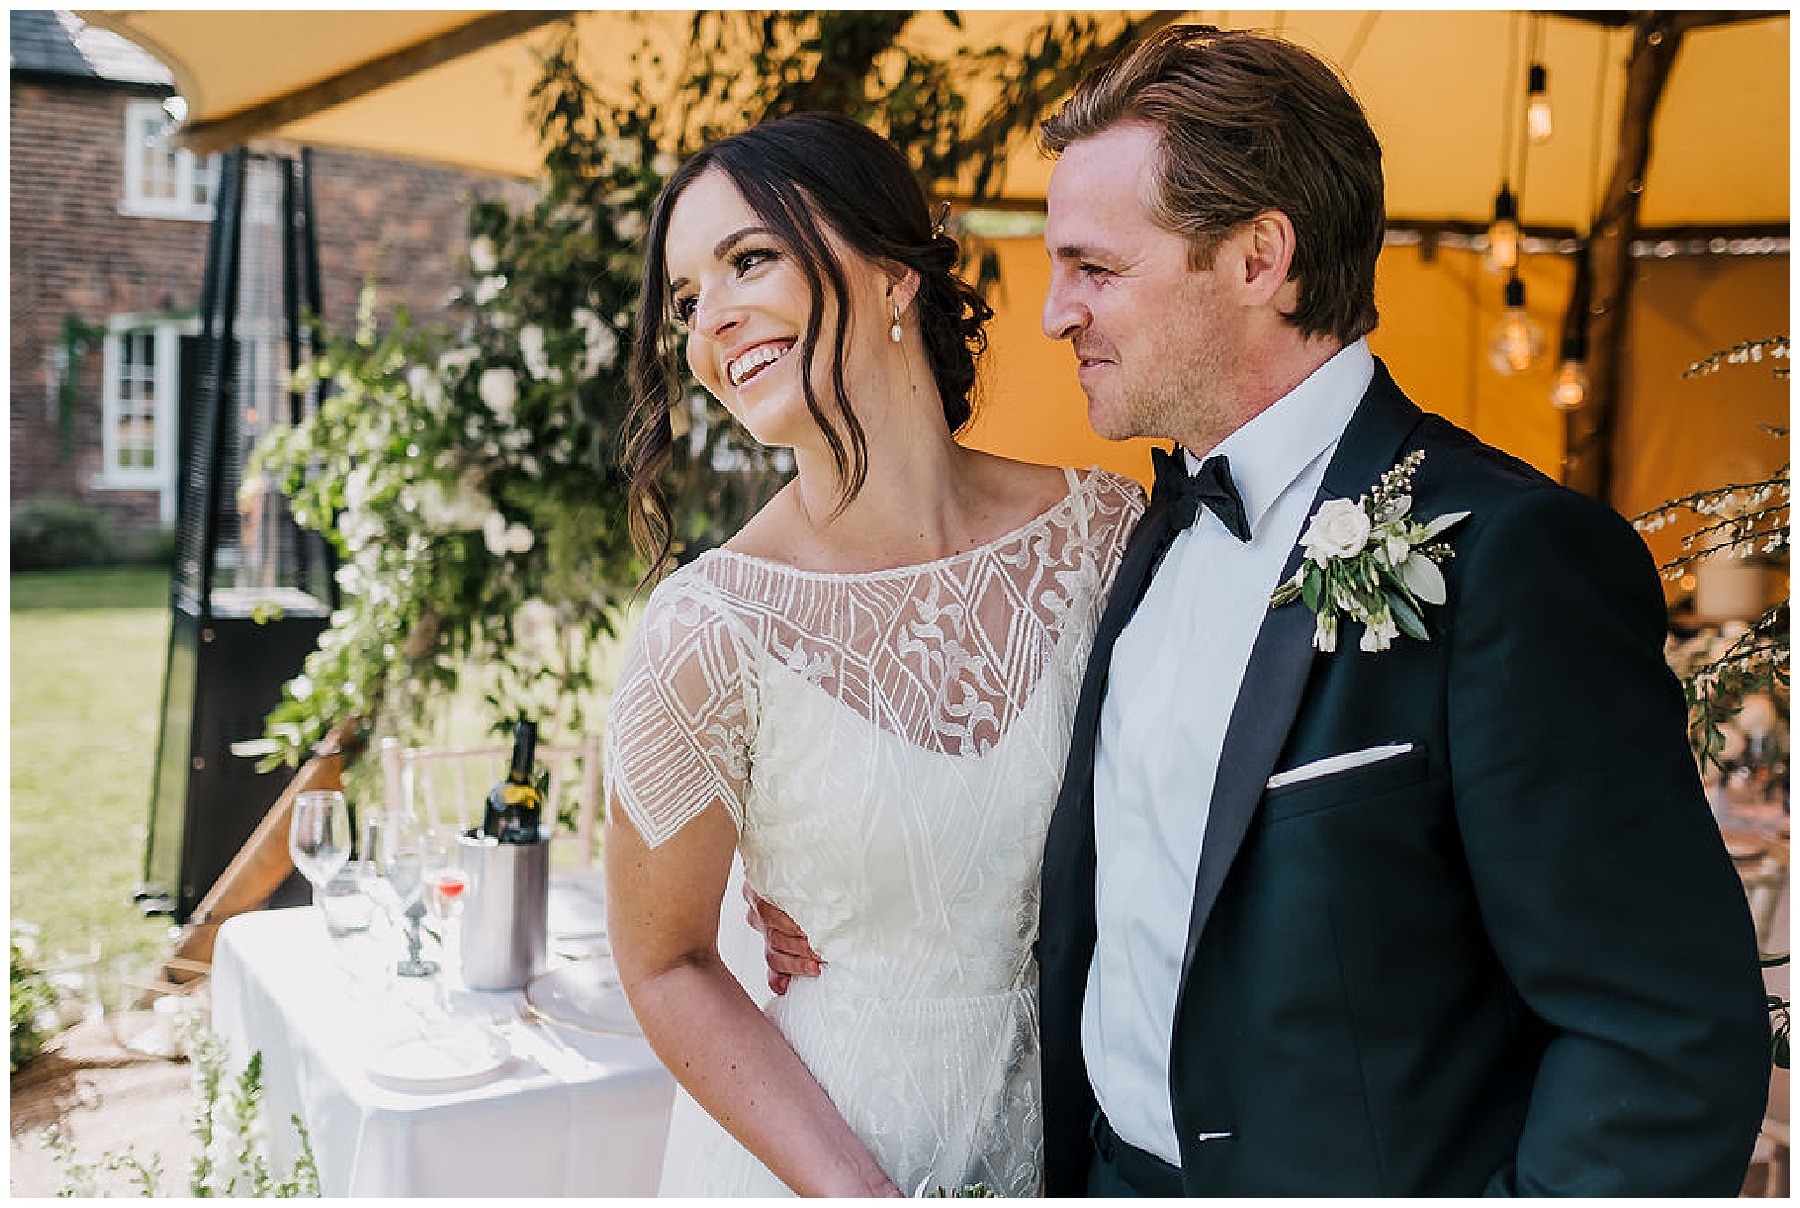 Emma + Will – Stock Farm – So lucky to have met this kind amazing couple